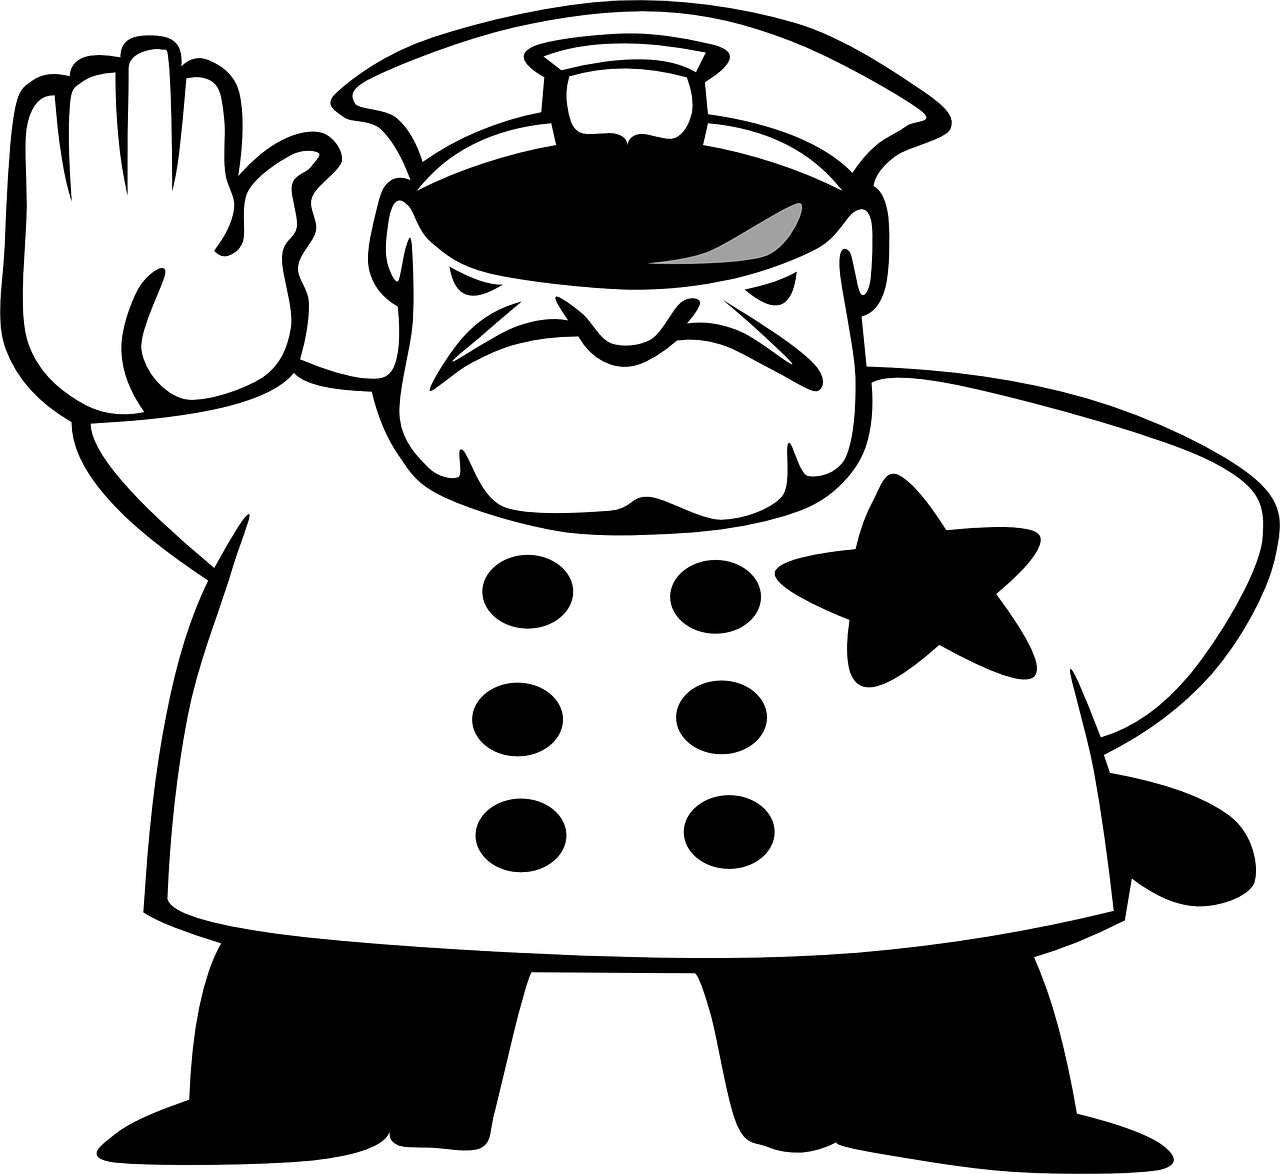 Stop clipart cartoon. Police hat drawing at